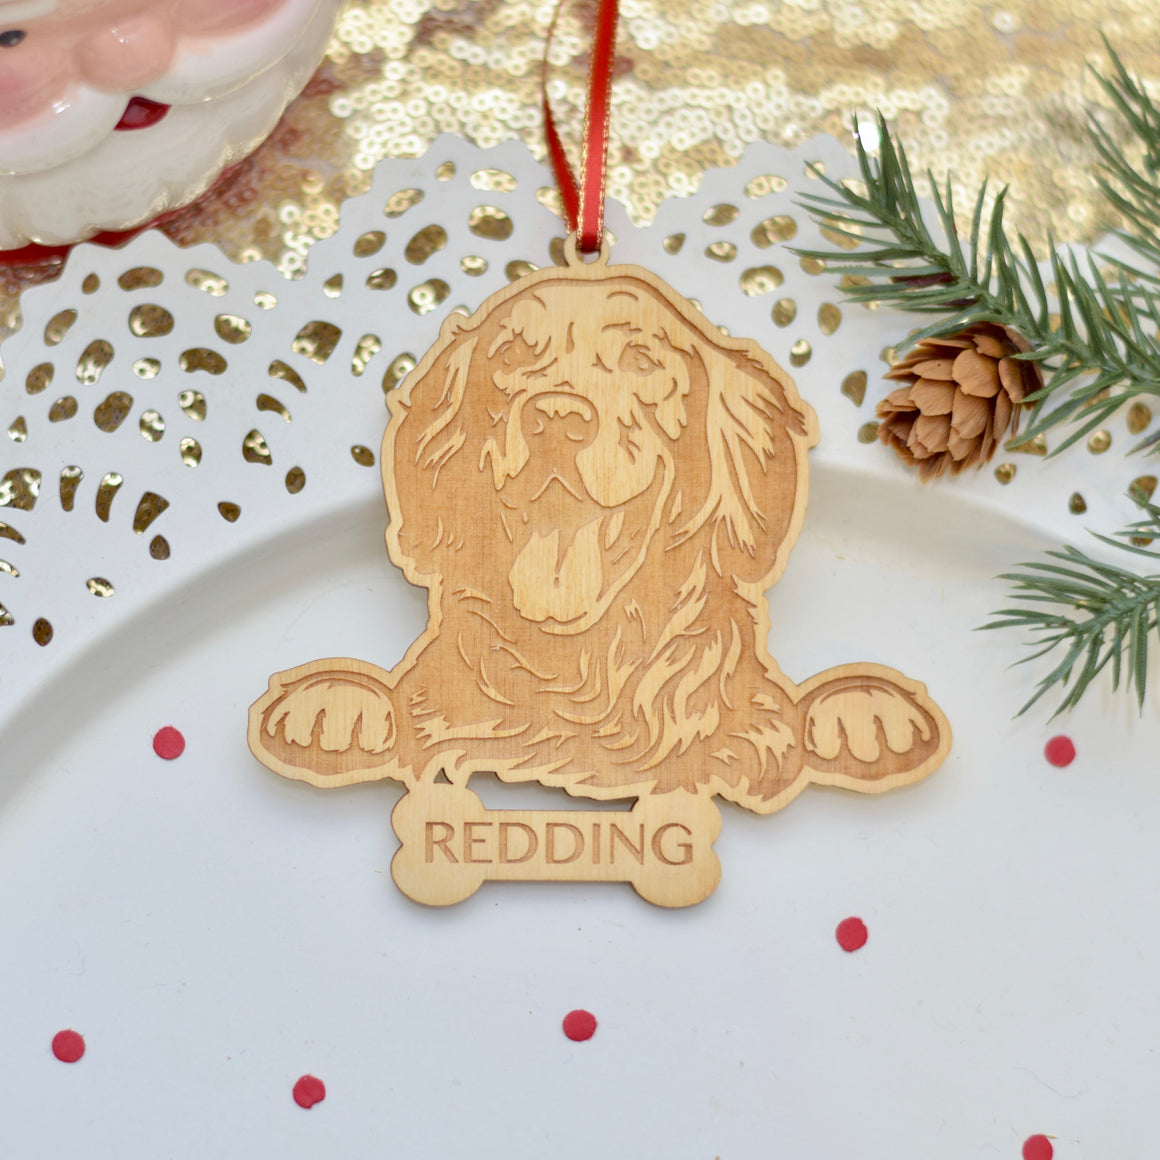 Golden Retriever Ornament for Christmas Tree Personalized with Name